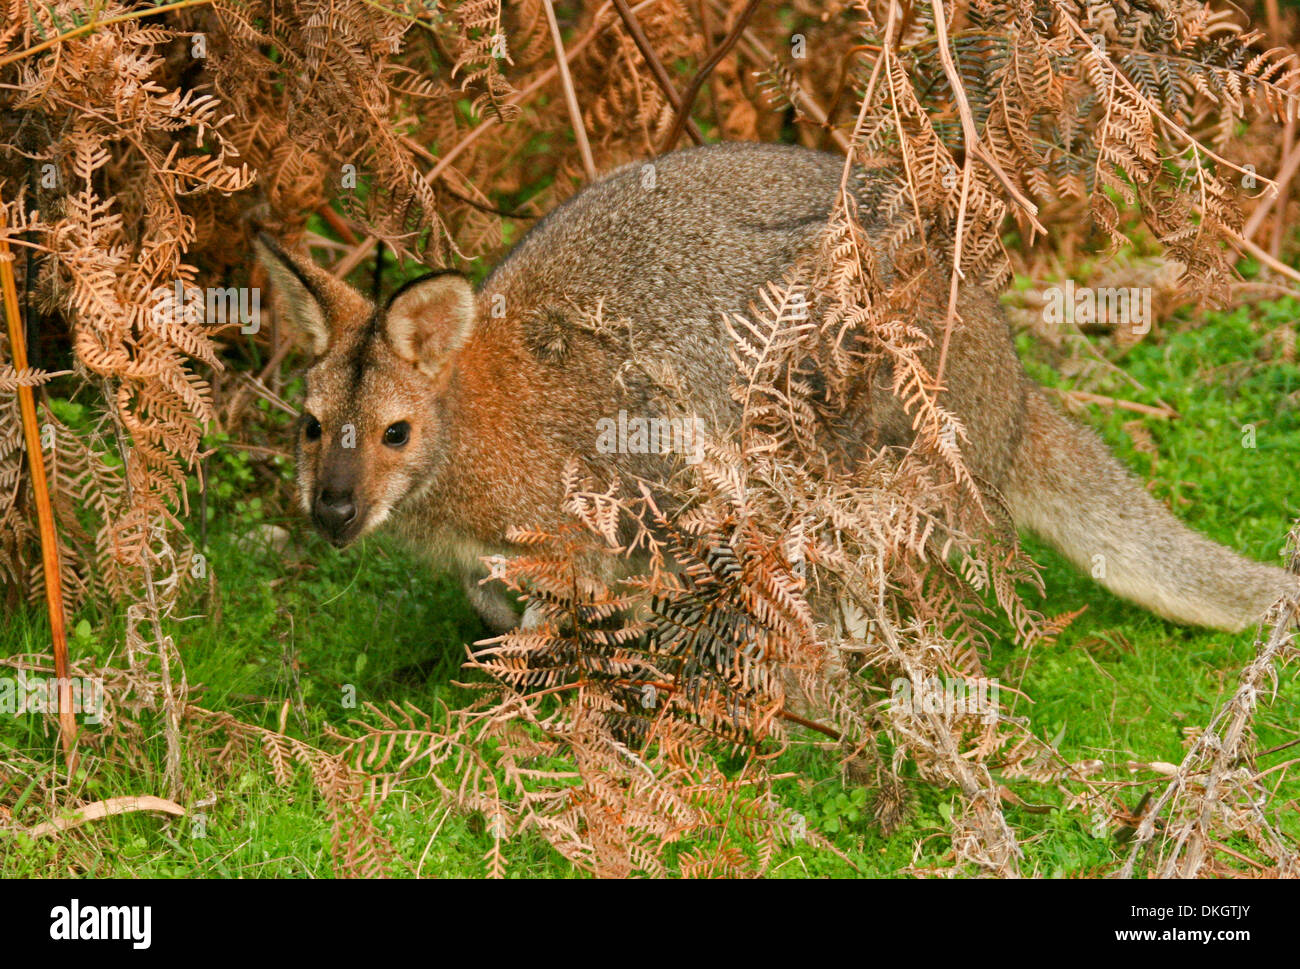 Red necked / Bennett's  wallaby Macropus rufogriseus among bracken and emerald grass in forest of Grampians National Park Victoria Australia Stock Photo